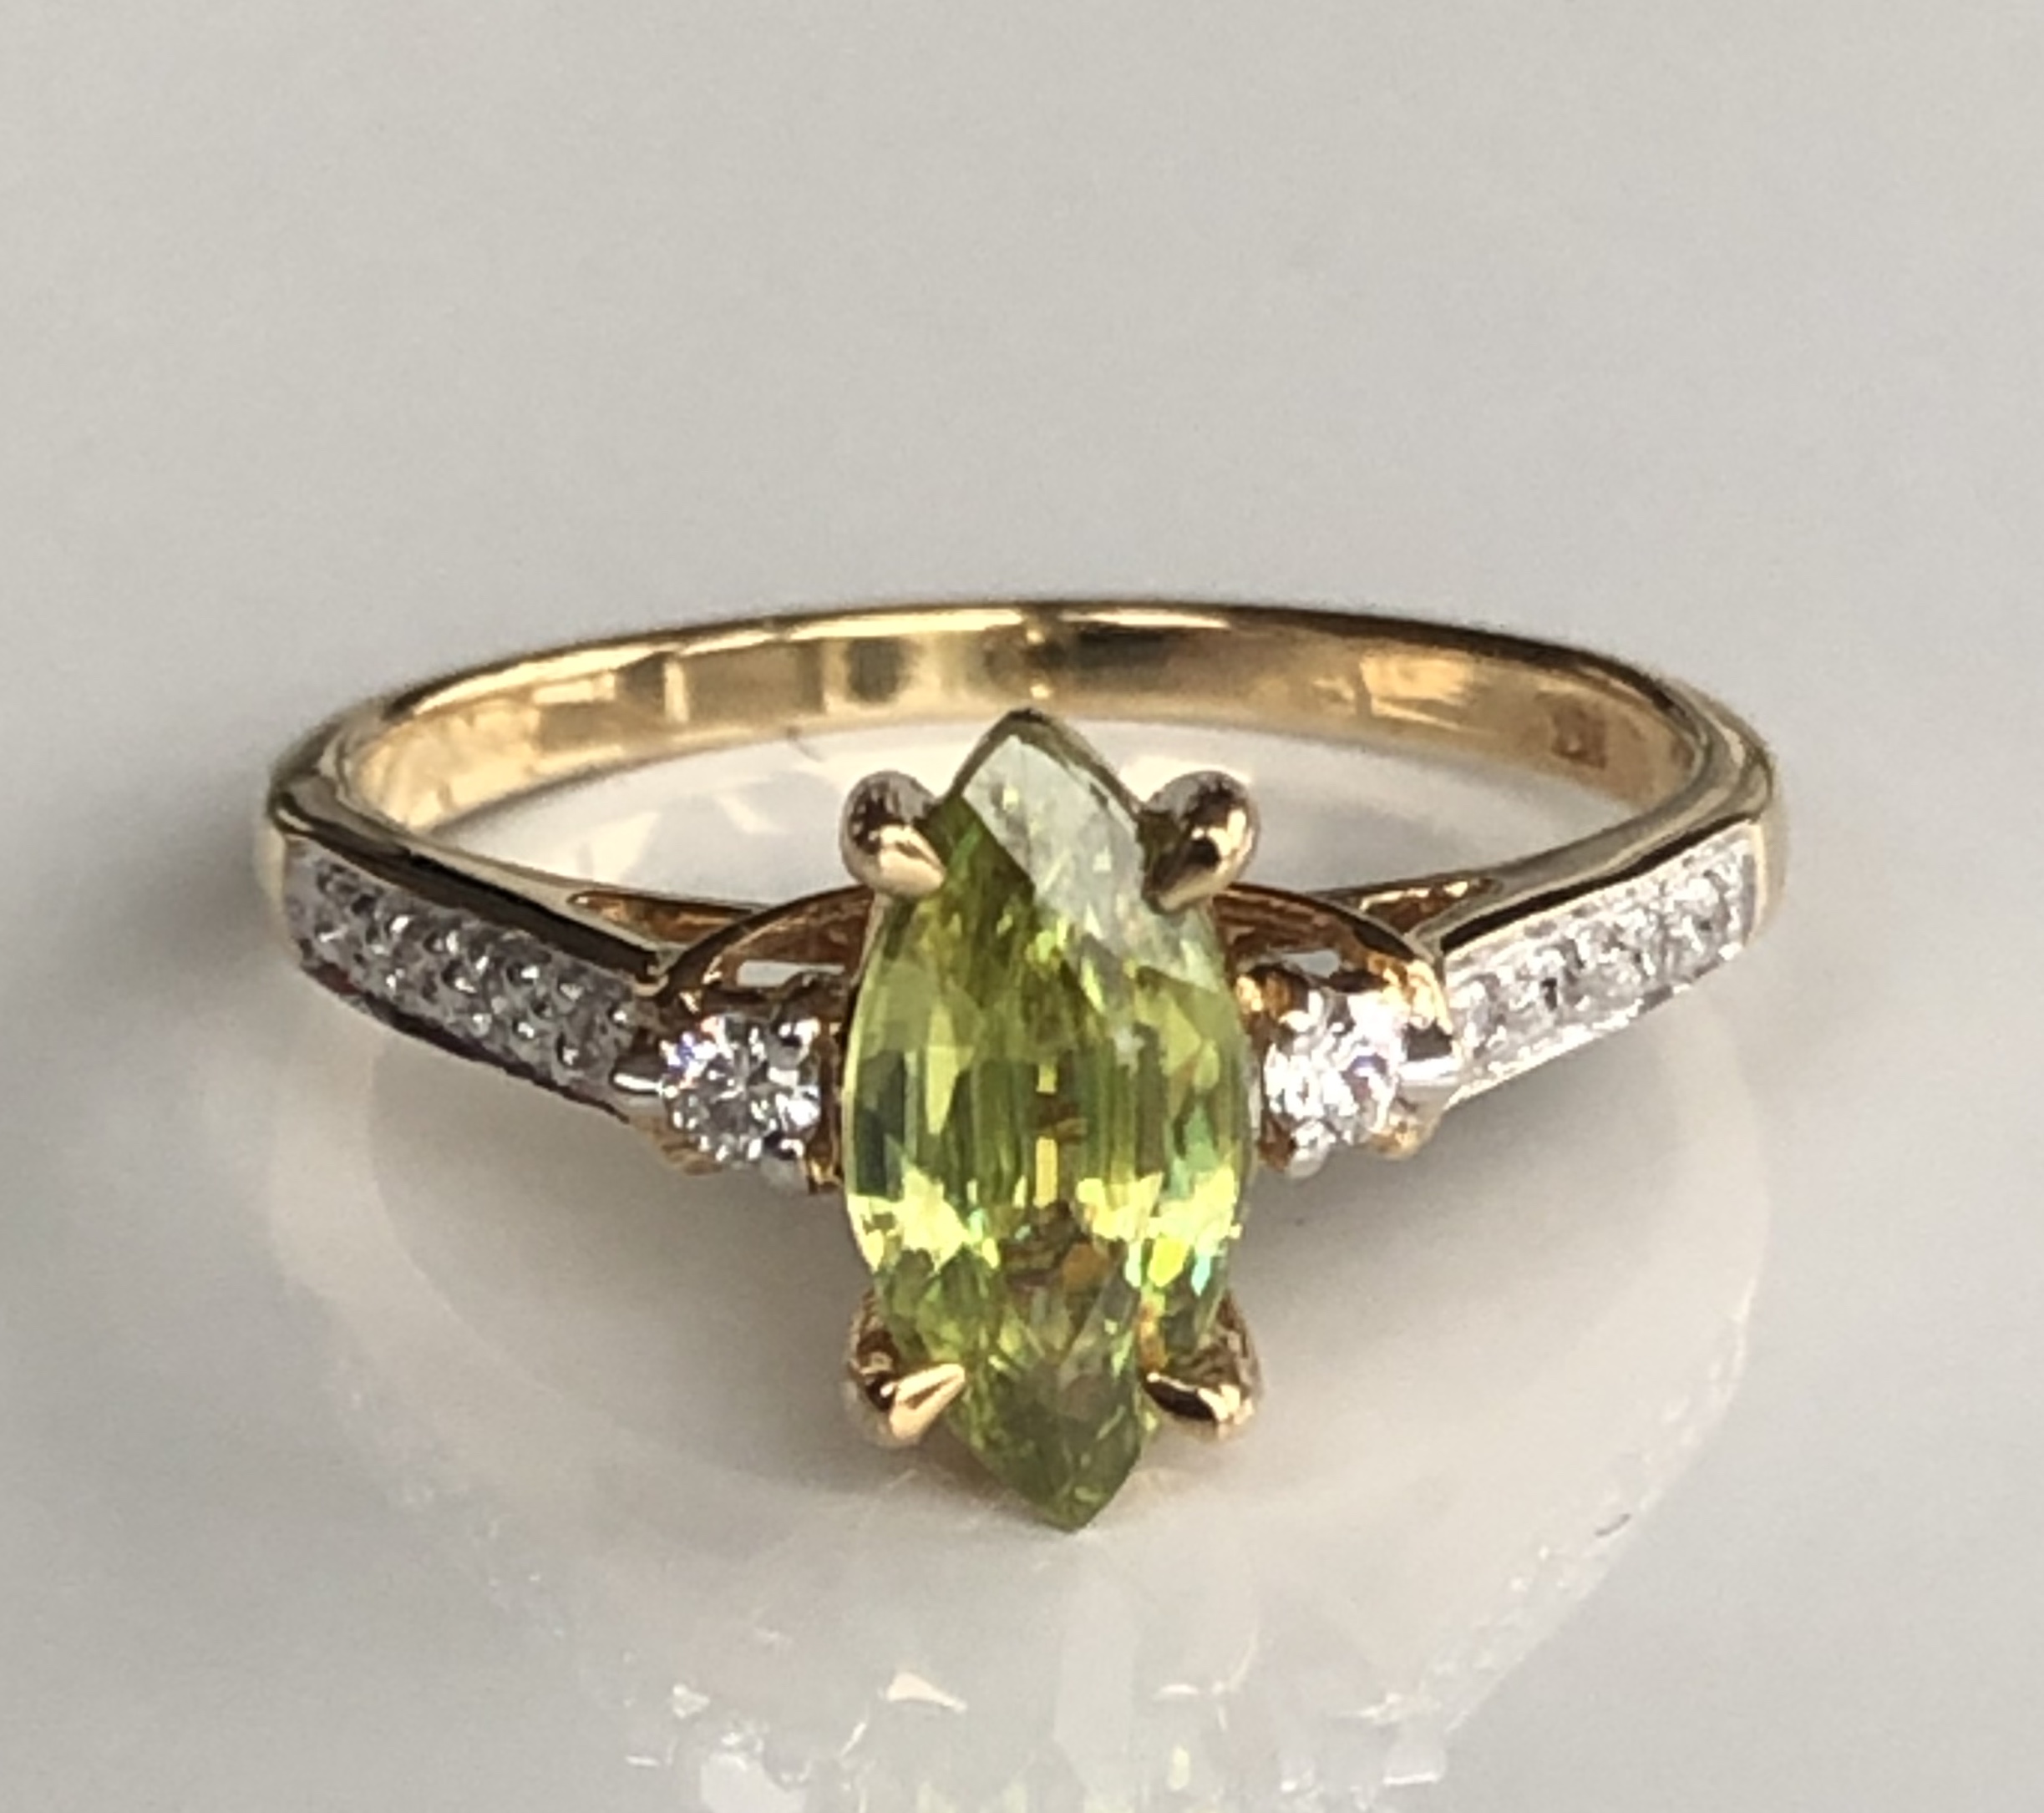 AN 18CT GOLD, CAPELINHA SPHENE AND DIAMOND RING The marquise cut Capelinha Sphene on diamond